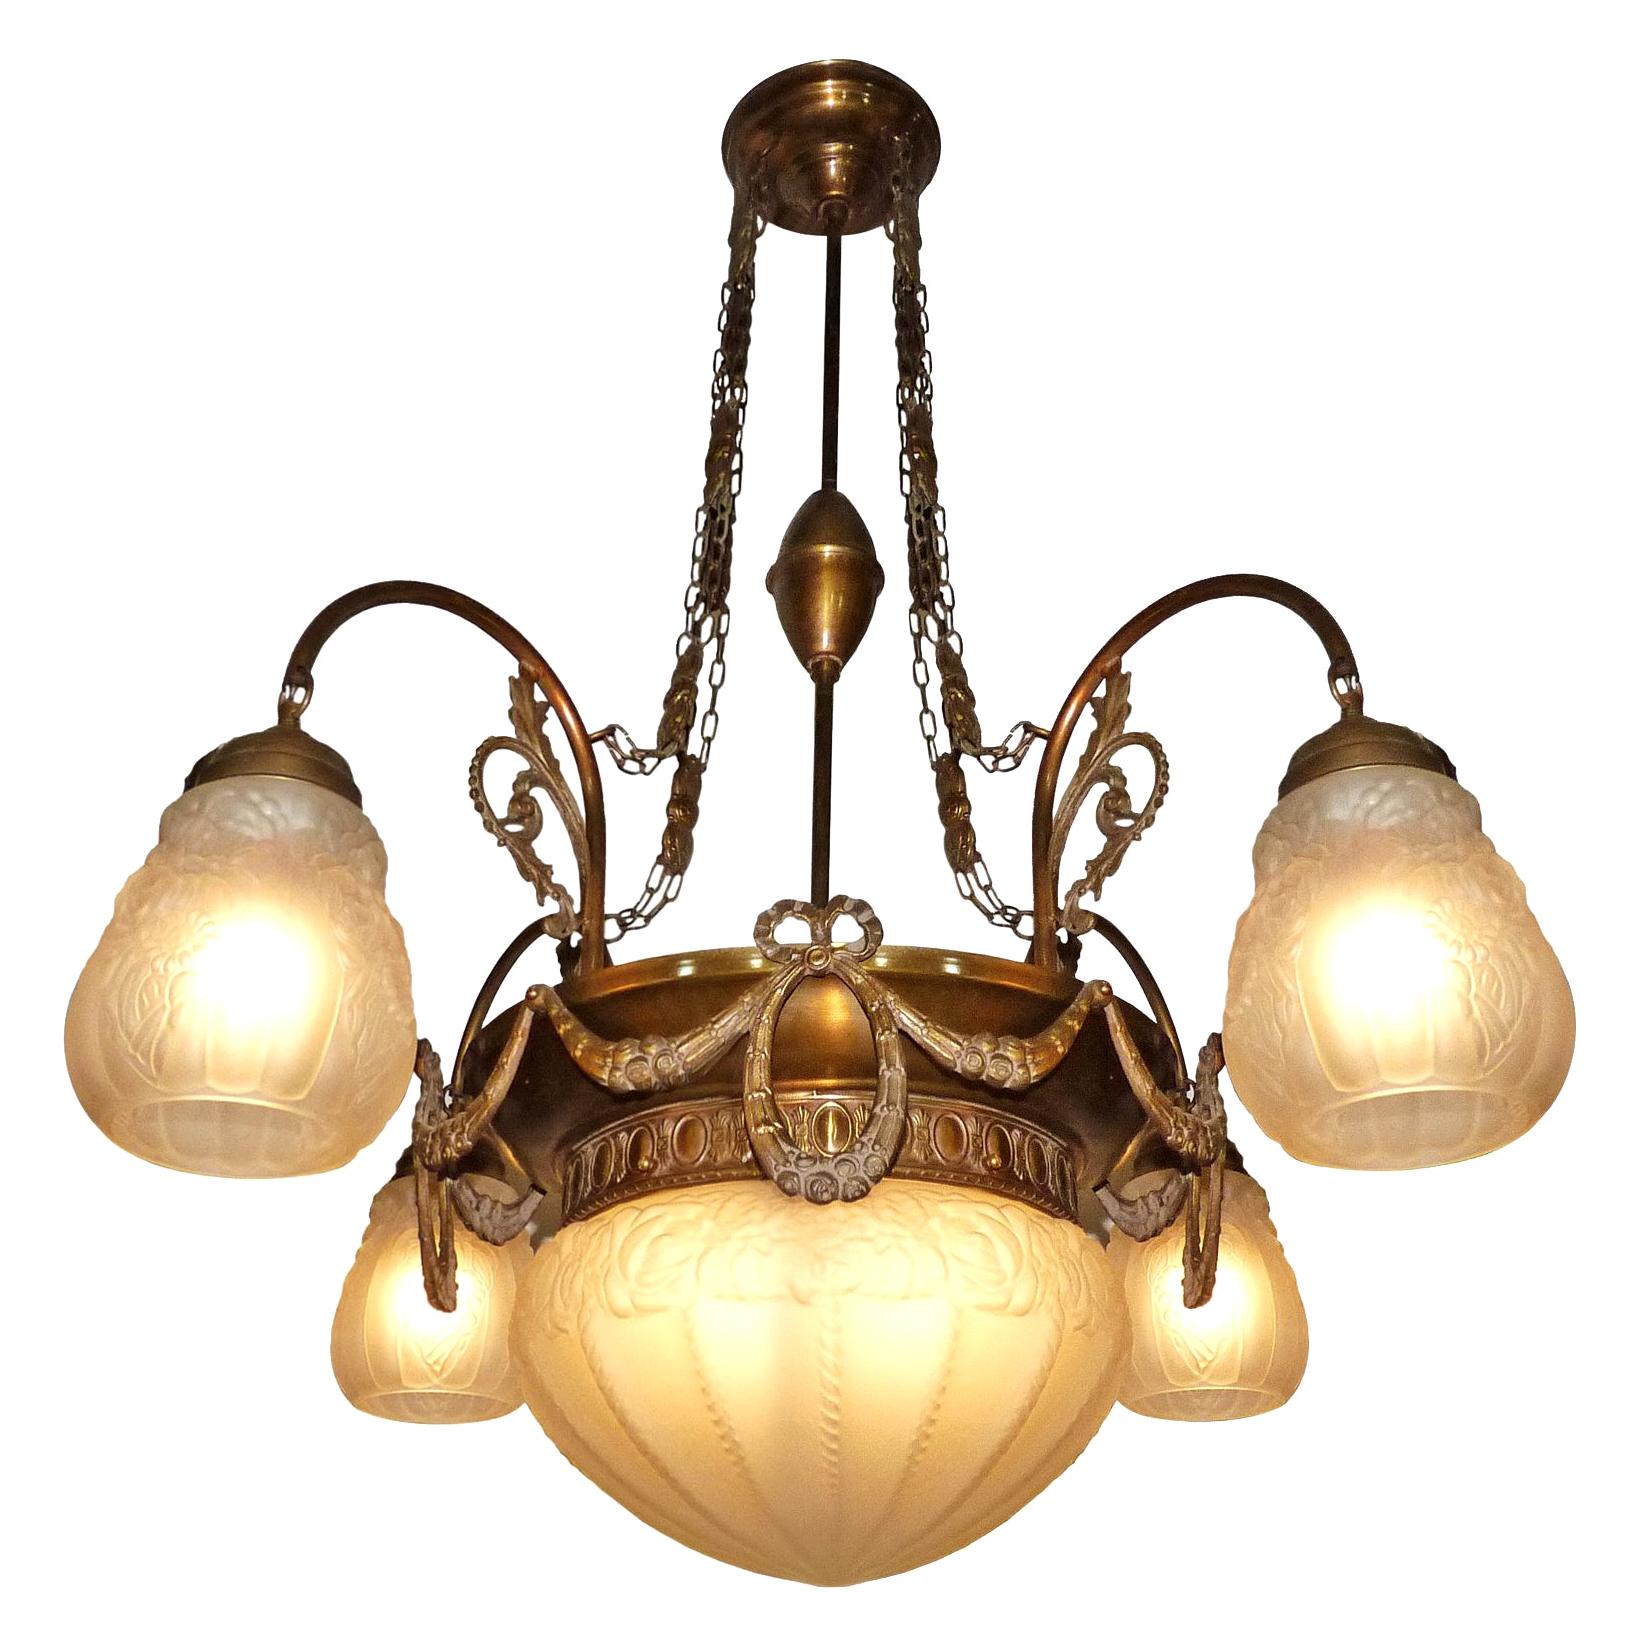 French Art Deco and Art Nouveau in frosted glass, 5-light chandelier/ brass with garlands. 
Age patina
Five light bulbs (four bulbs E14 40W and one bulb E27 60W)
Good working condition
Measures: Diameter 30 in / 75 cm
Height 34 in / 85 cm 
Glass